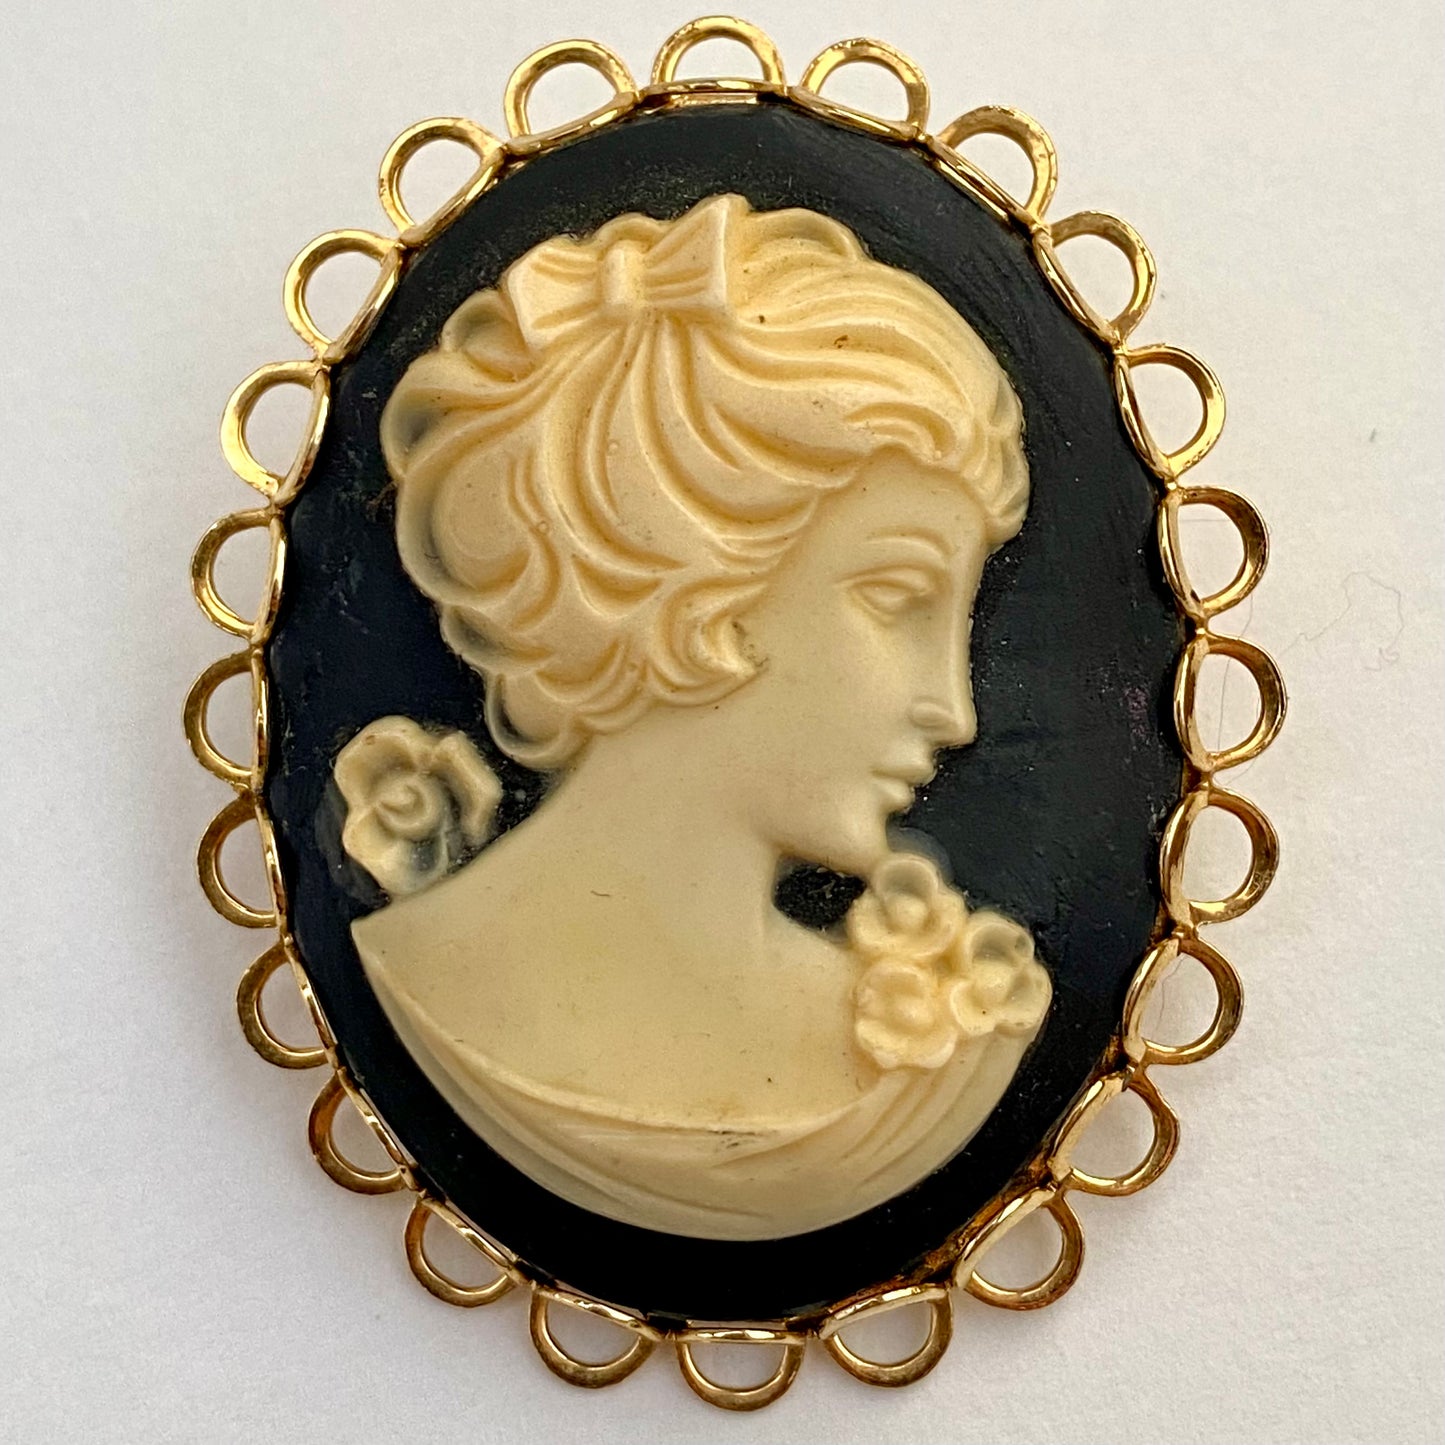 Late 70s/ Early 80s Cameo Brooch